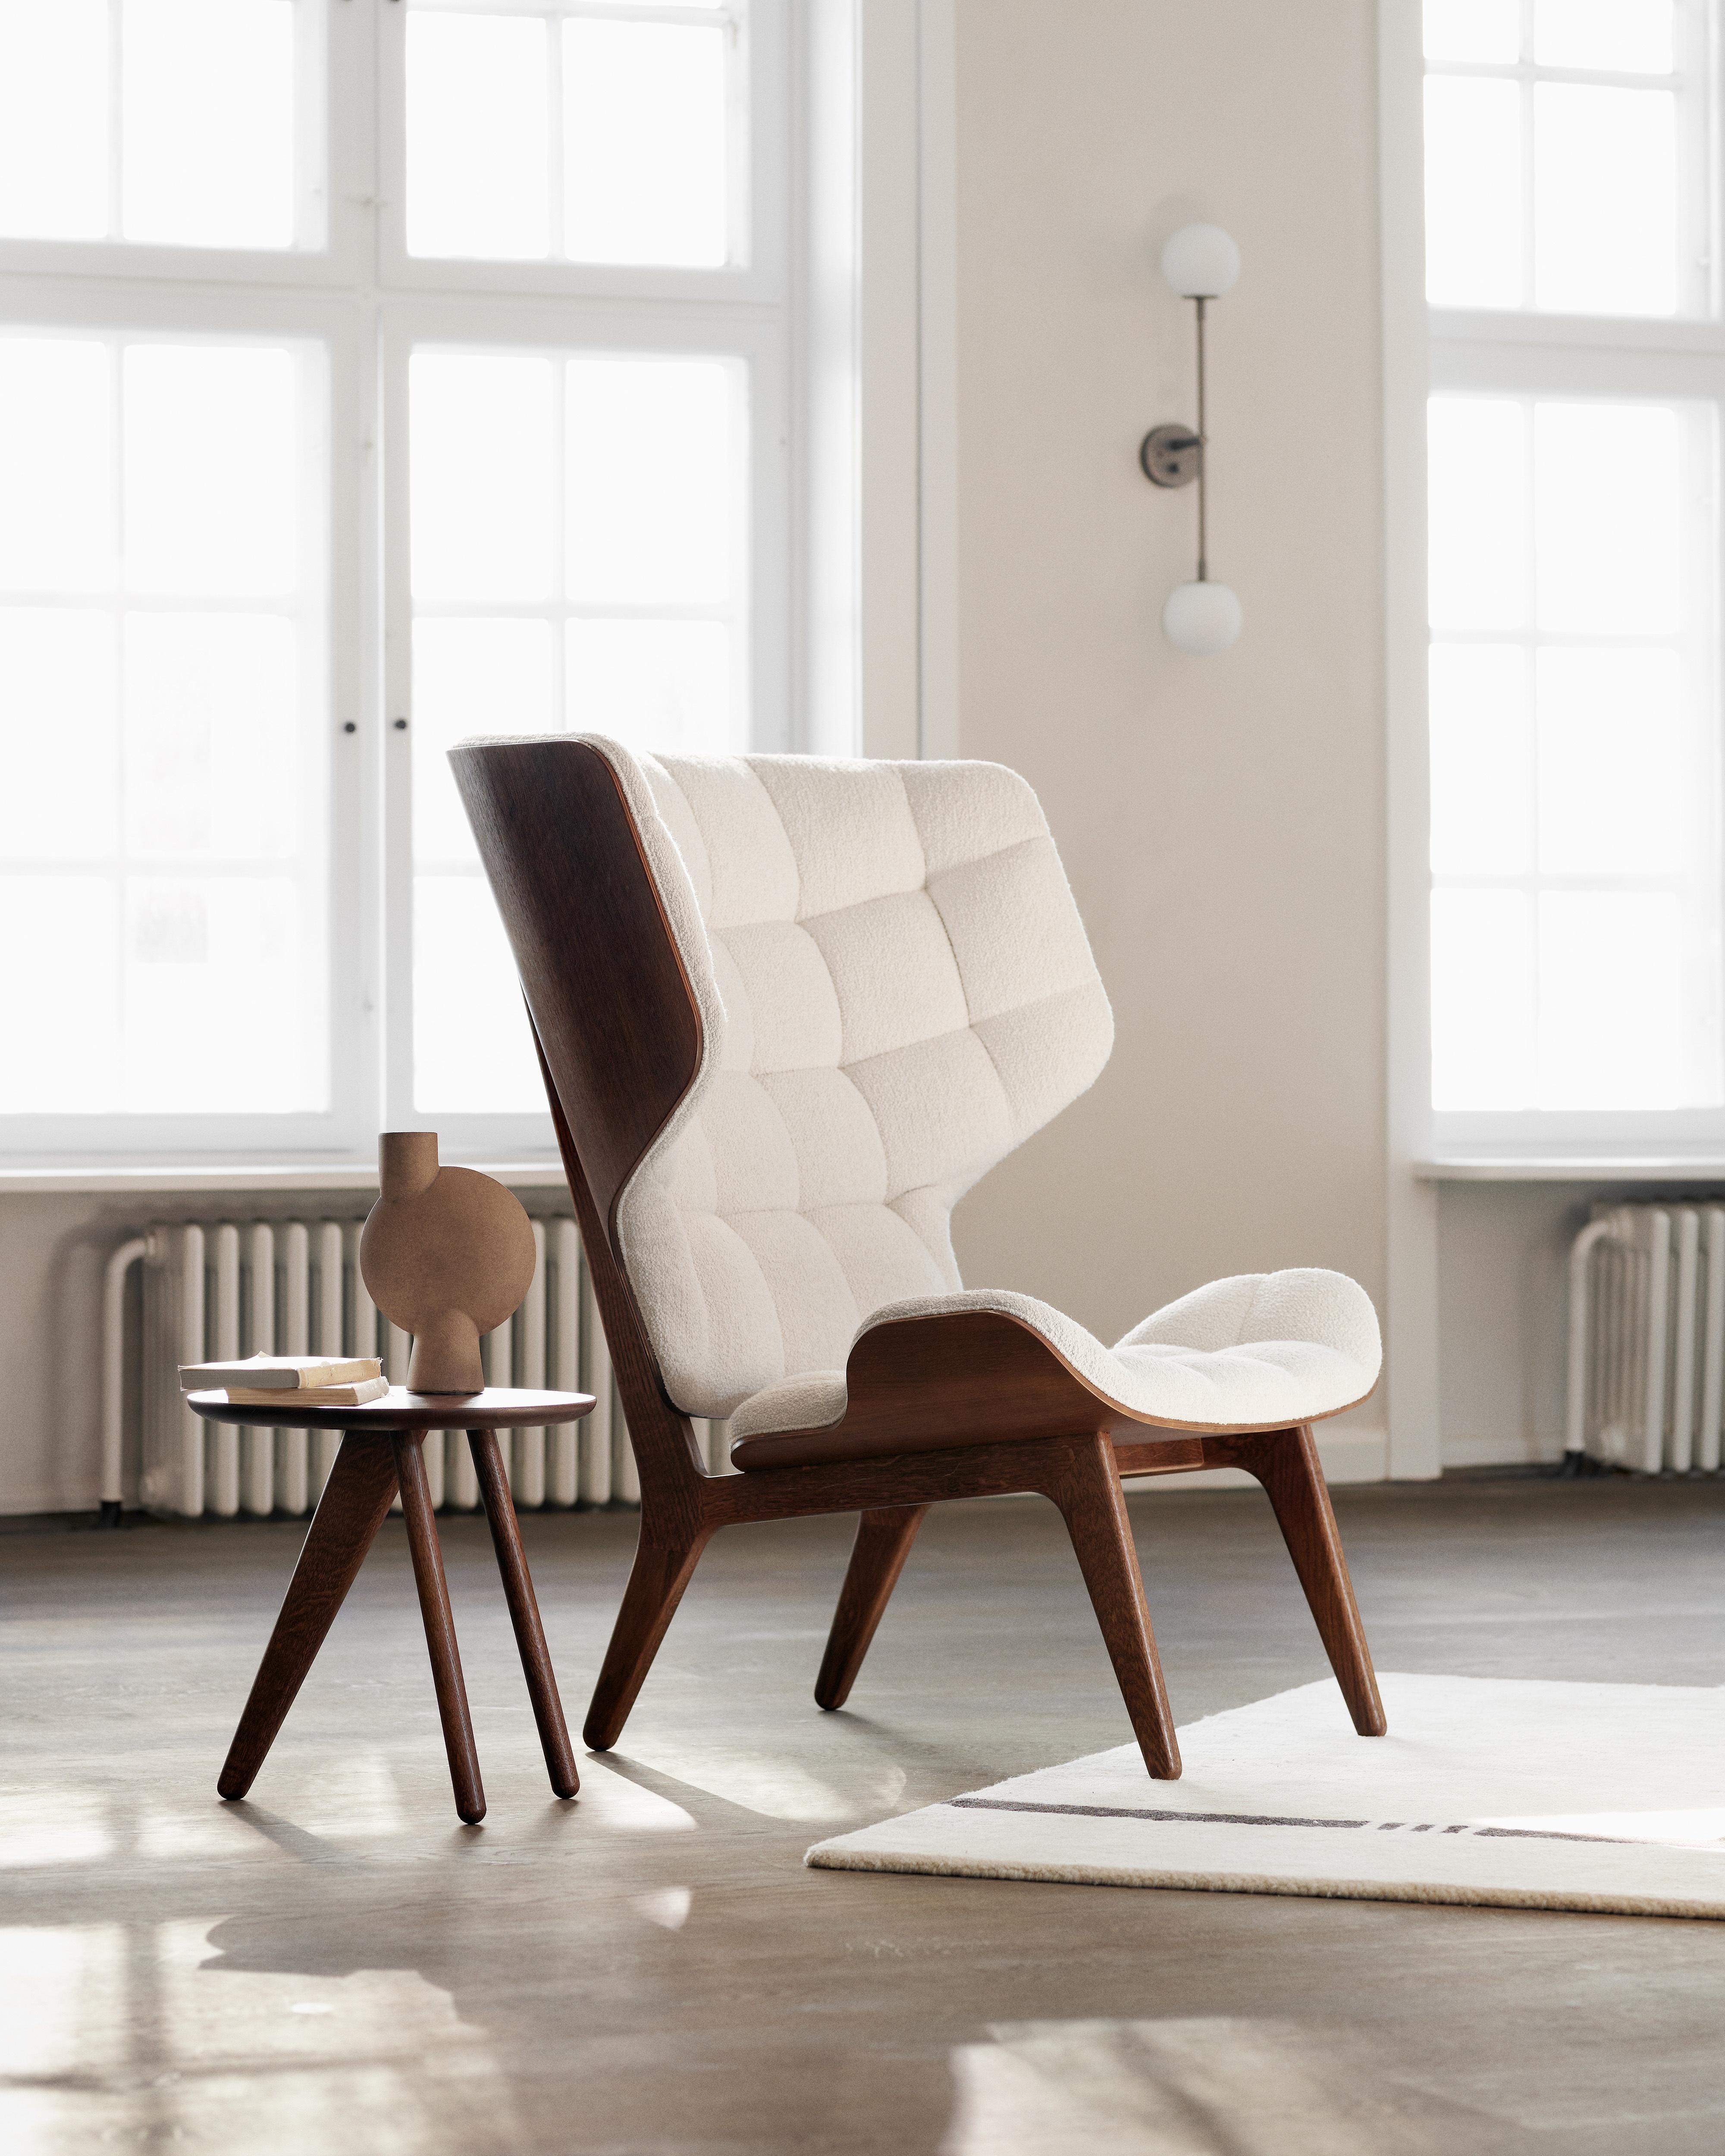 Mammoth chair + ottoman
Signed by Rune Krøjgaard & Knut Bendik Humlevik for Norr11. 

Dimensions:
- Chair: W 89 cm / D 87 cm / H 104 cm / SH 35,5 cm
- Ottoman: W 61,5 cm / D 53 cm / H 37 cm

Models shown on the picture:
Wood: Dark Smoked